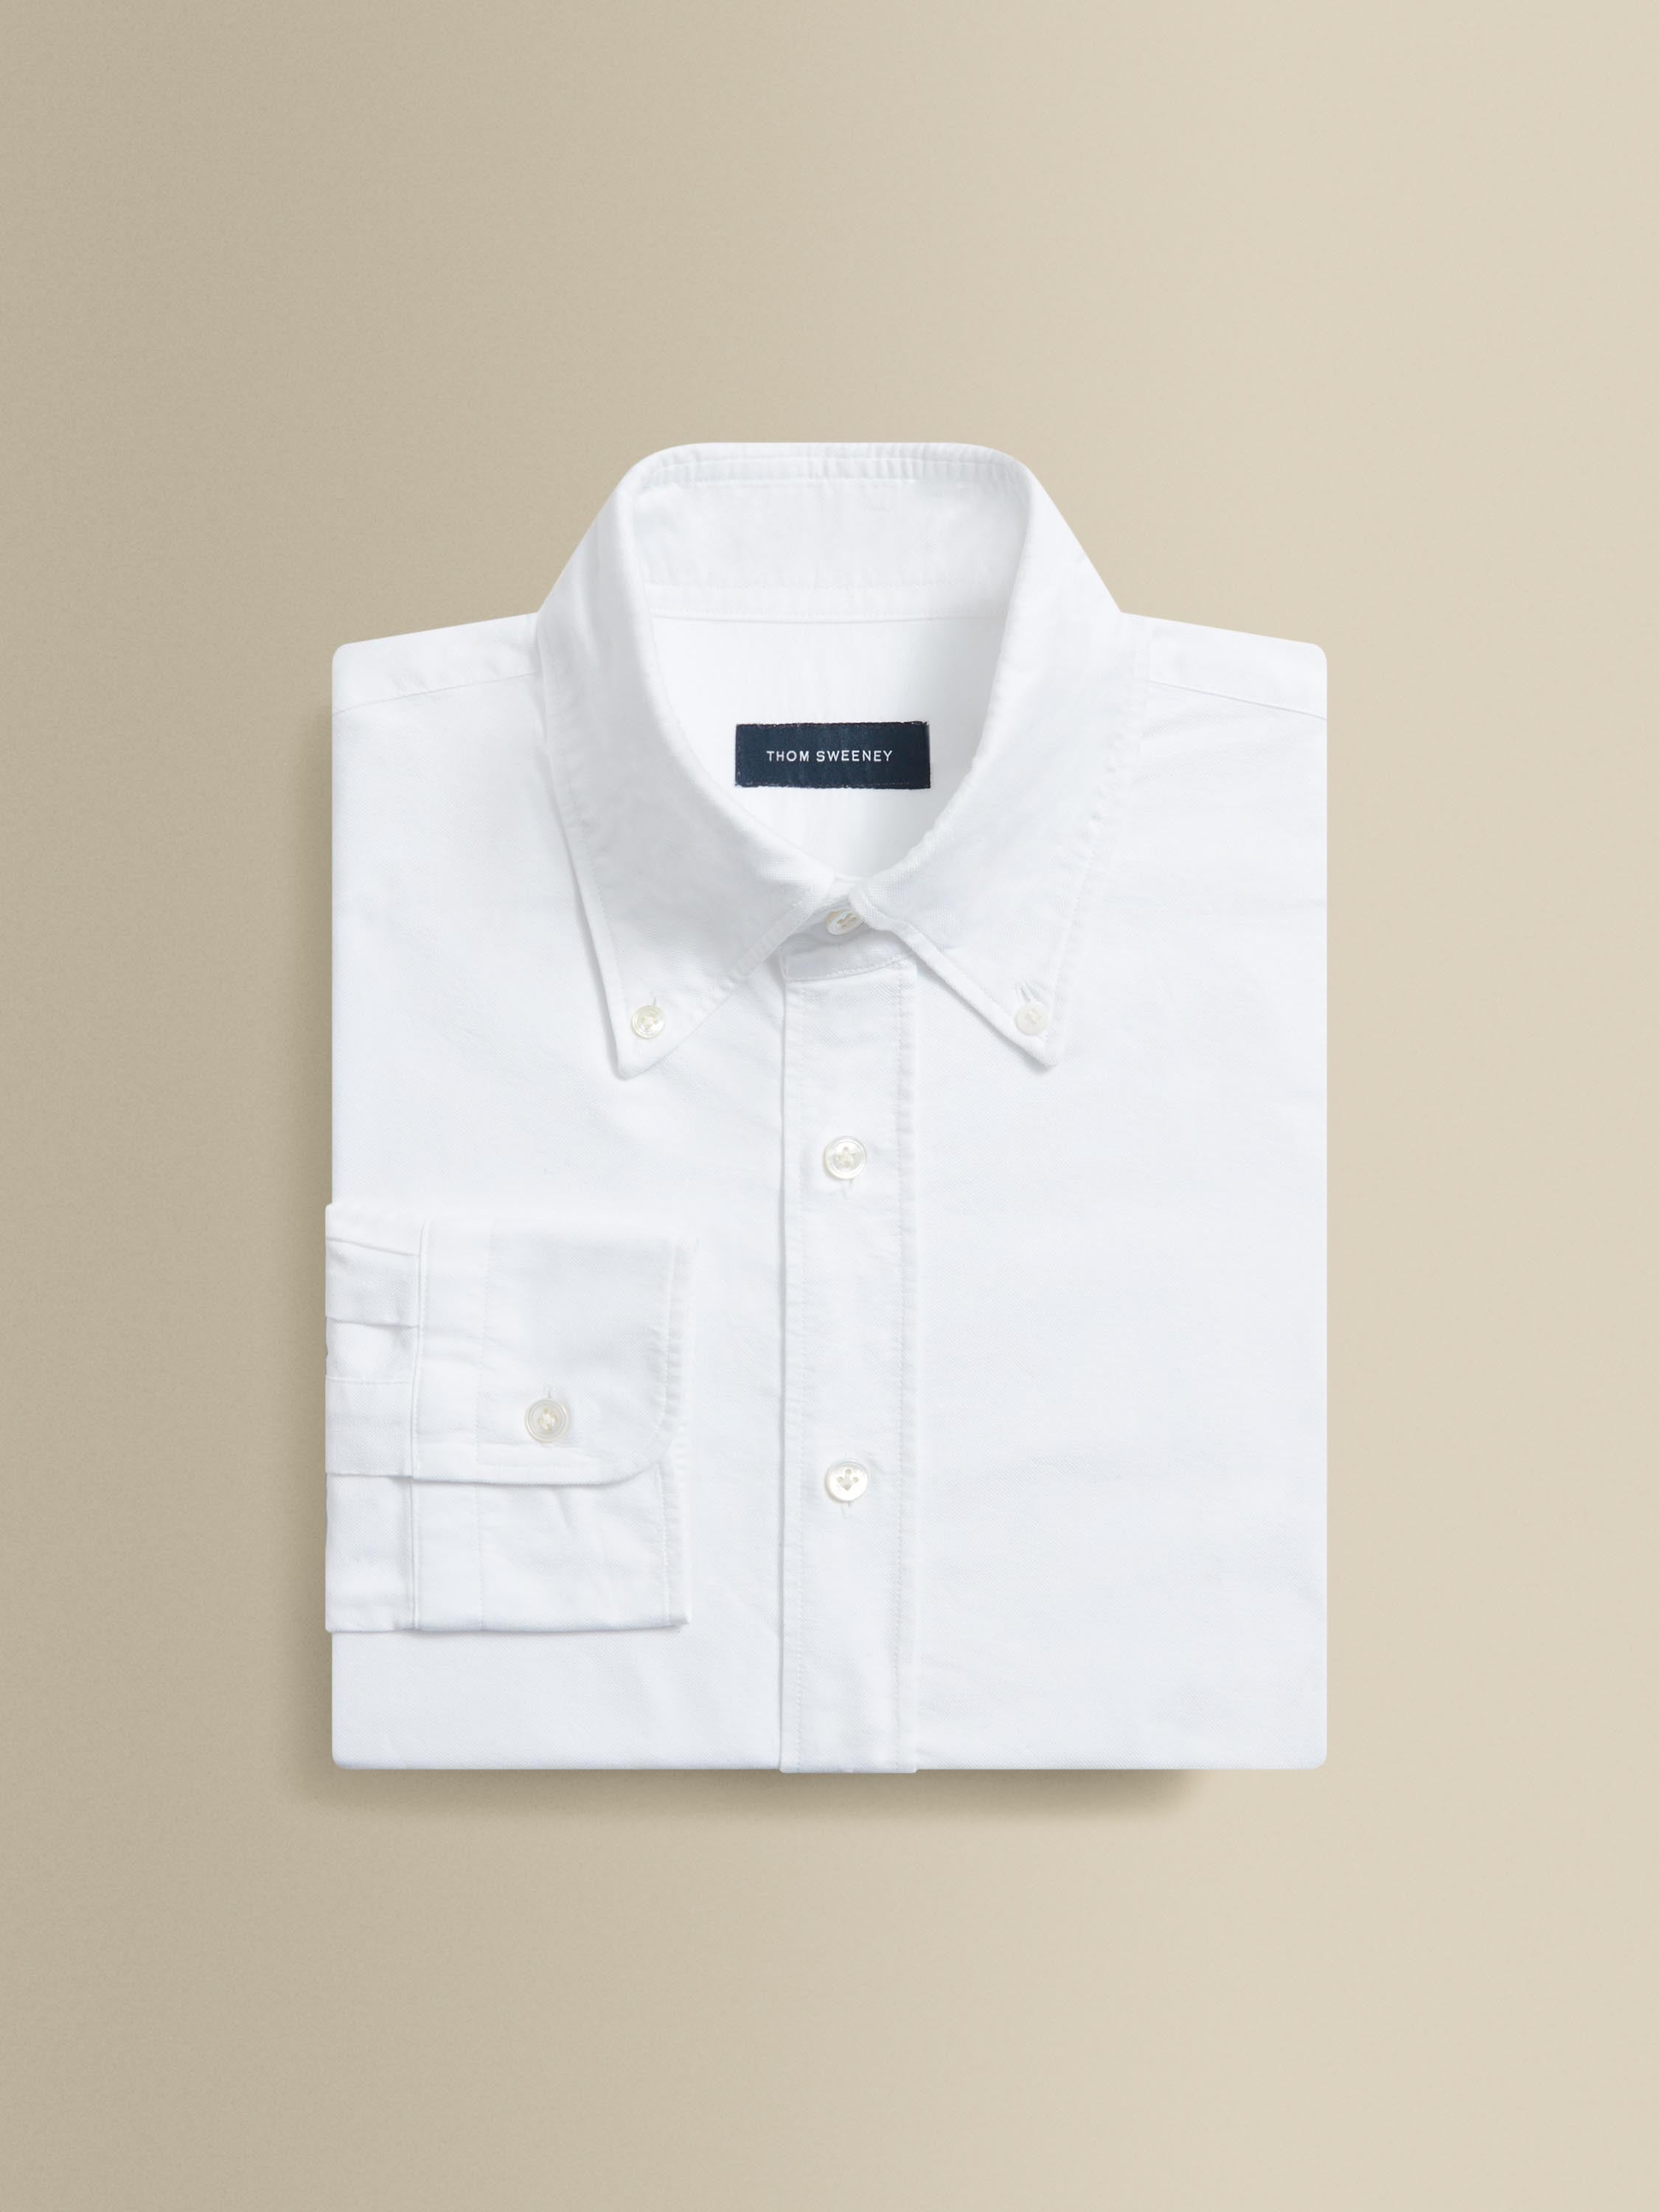 Heavy Cotton Casual Button Down Oxford Shirt White Product Image